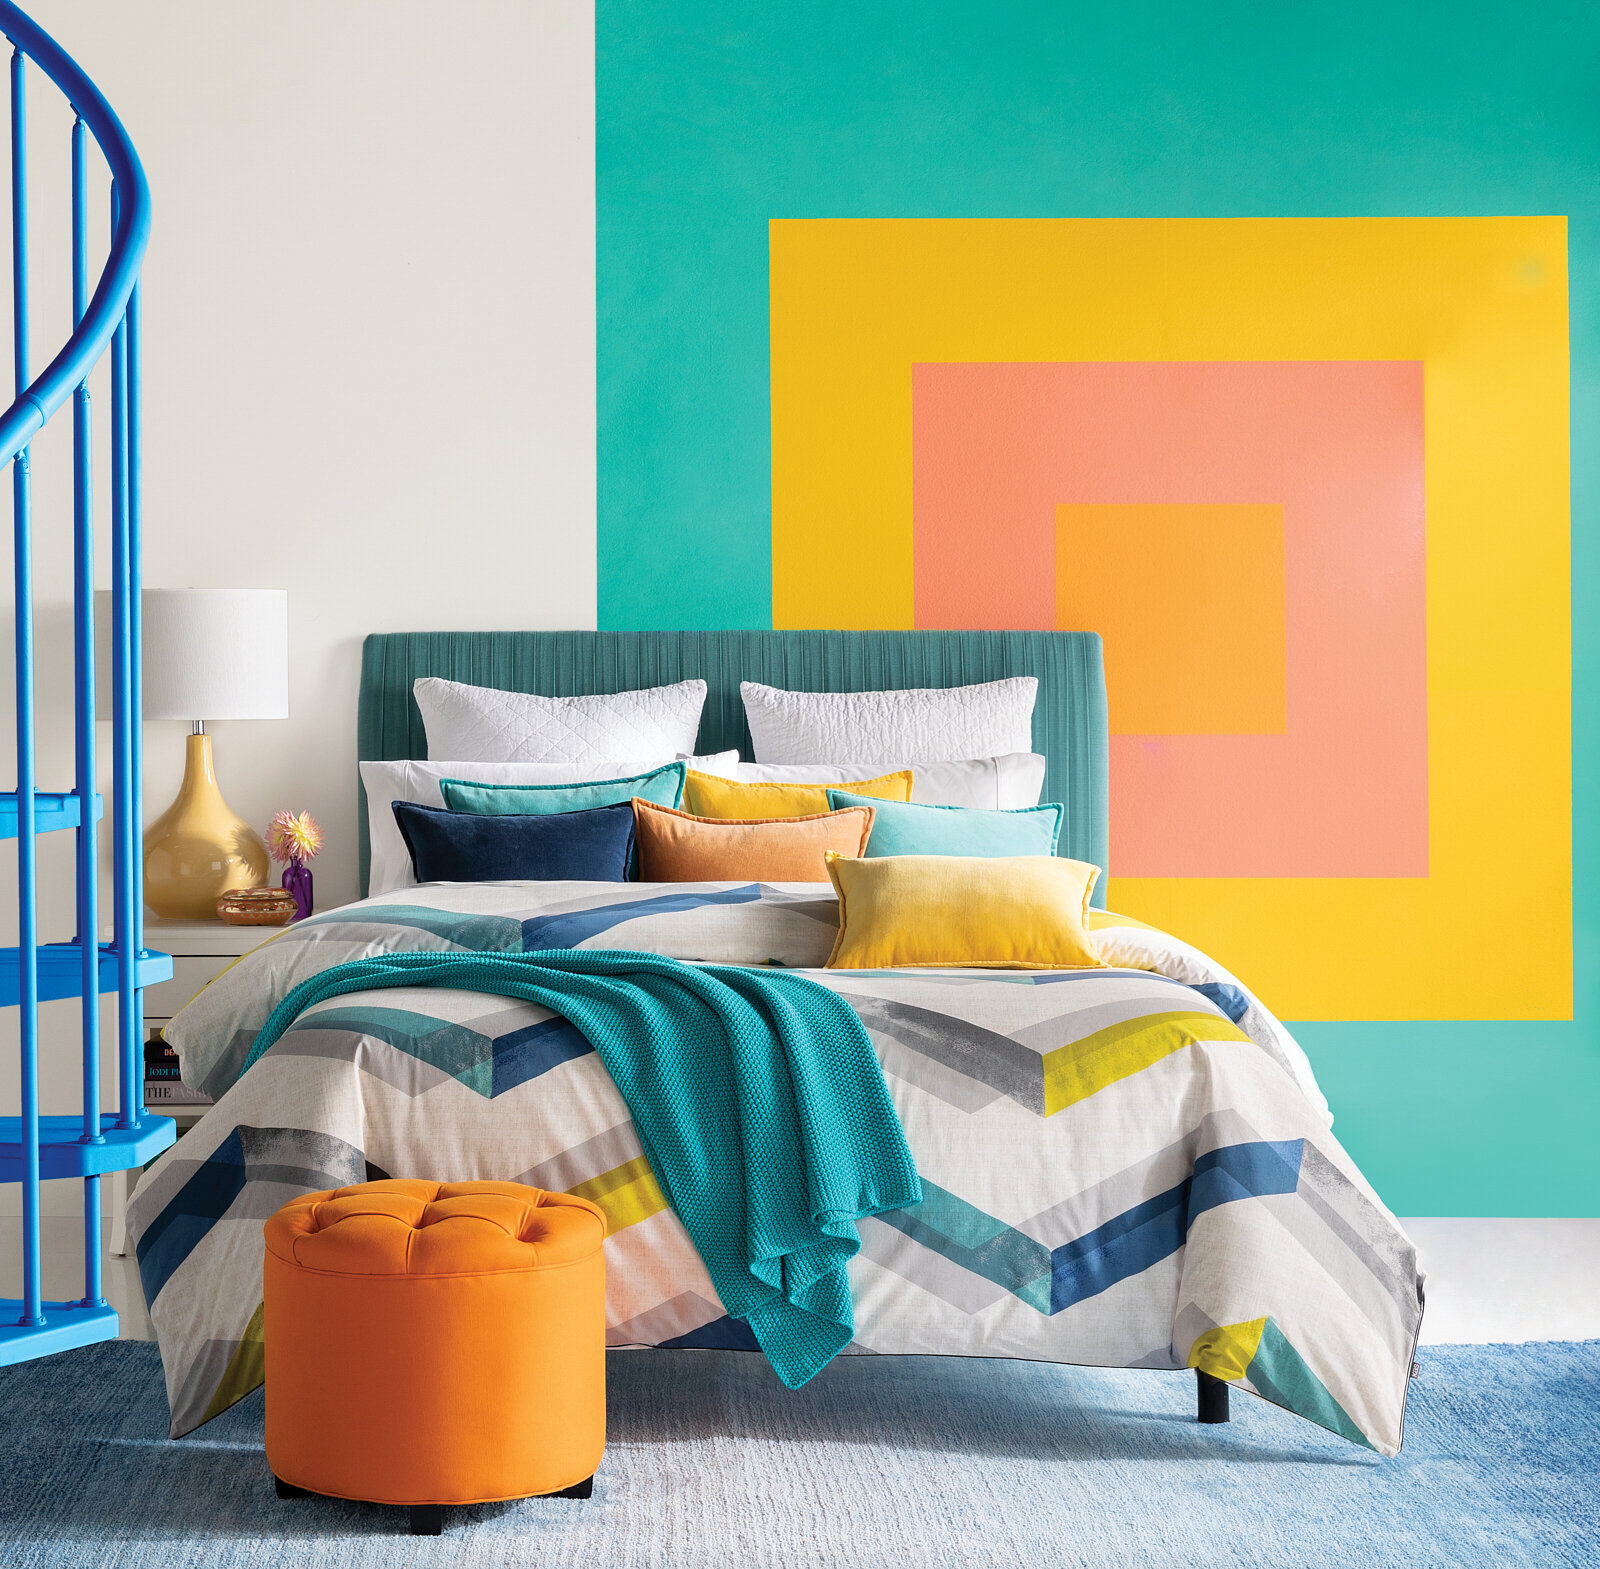  Wayfair spring furniture collection for print catalog and e-commerce 